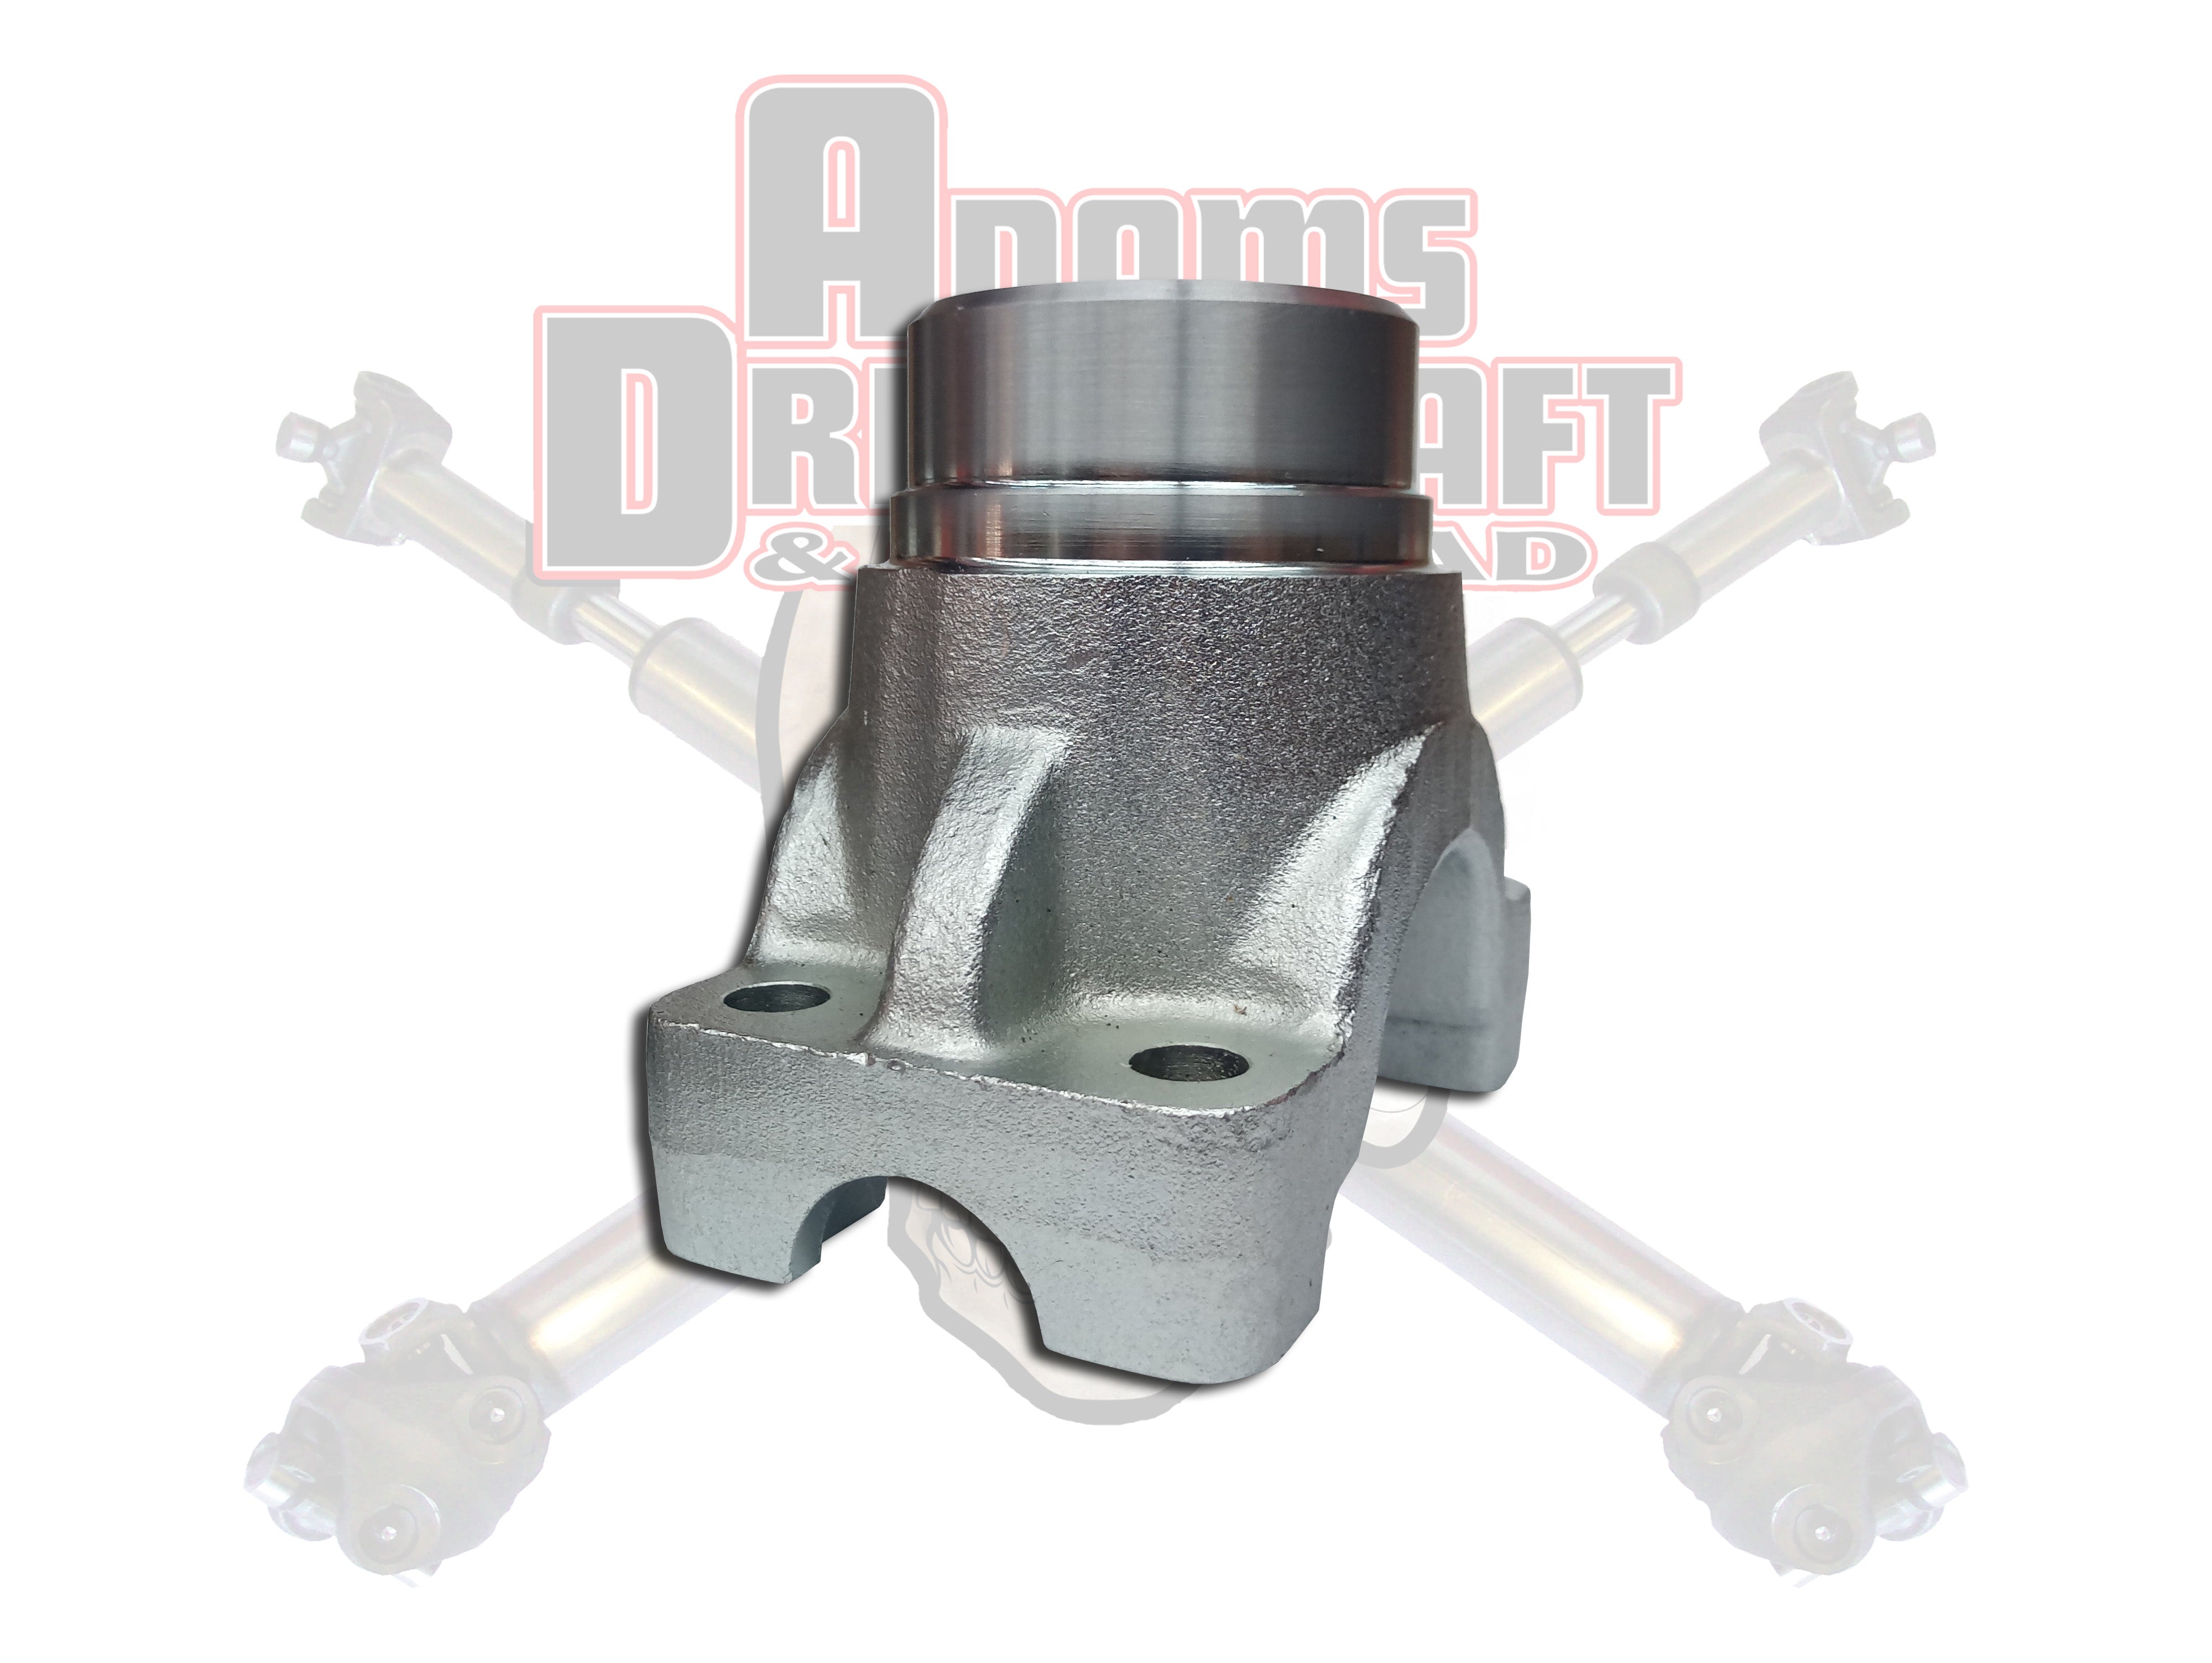 Adams Forged Jeep JT Overland  Rear 1350 Series Pinion Yoke U-Bolt Style with an M220 Differential.